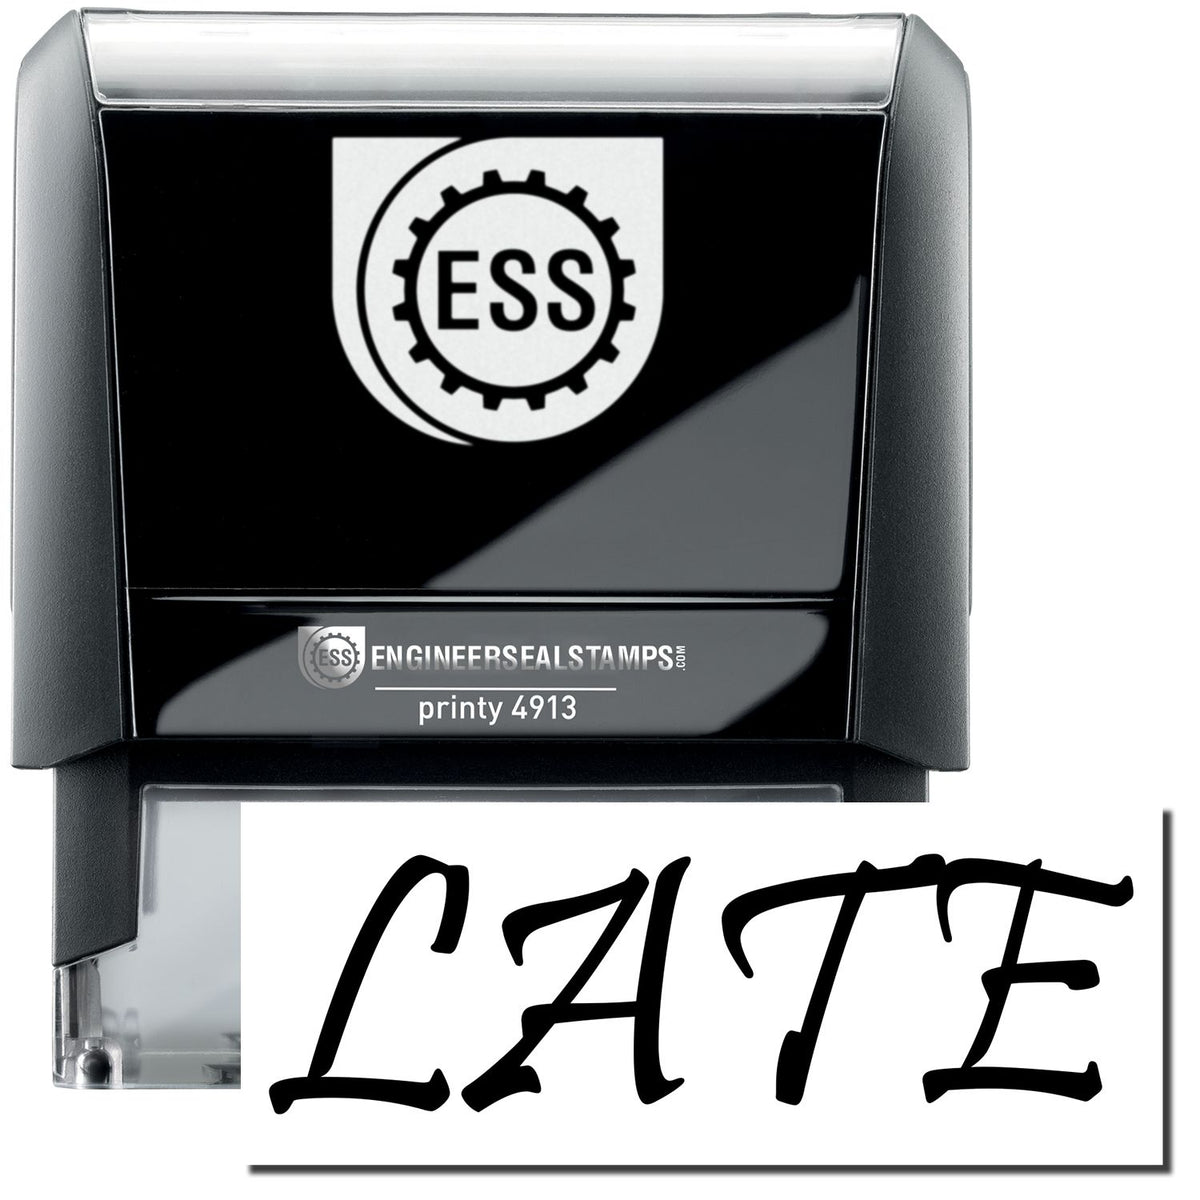 A self-inking stamp with a stamped image showing how the text &quot;LATE&quot; in a unique large bold font is displayed by it.